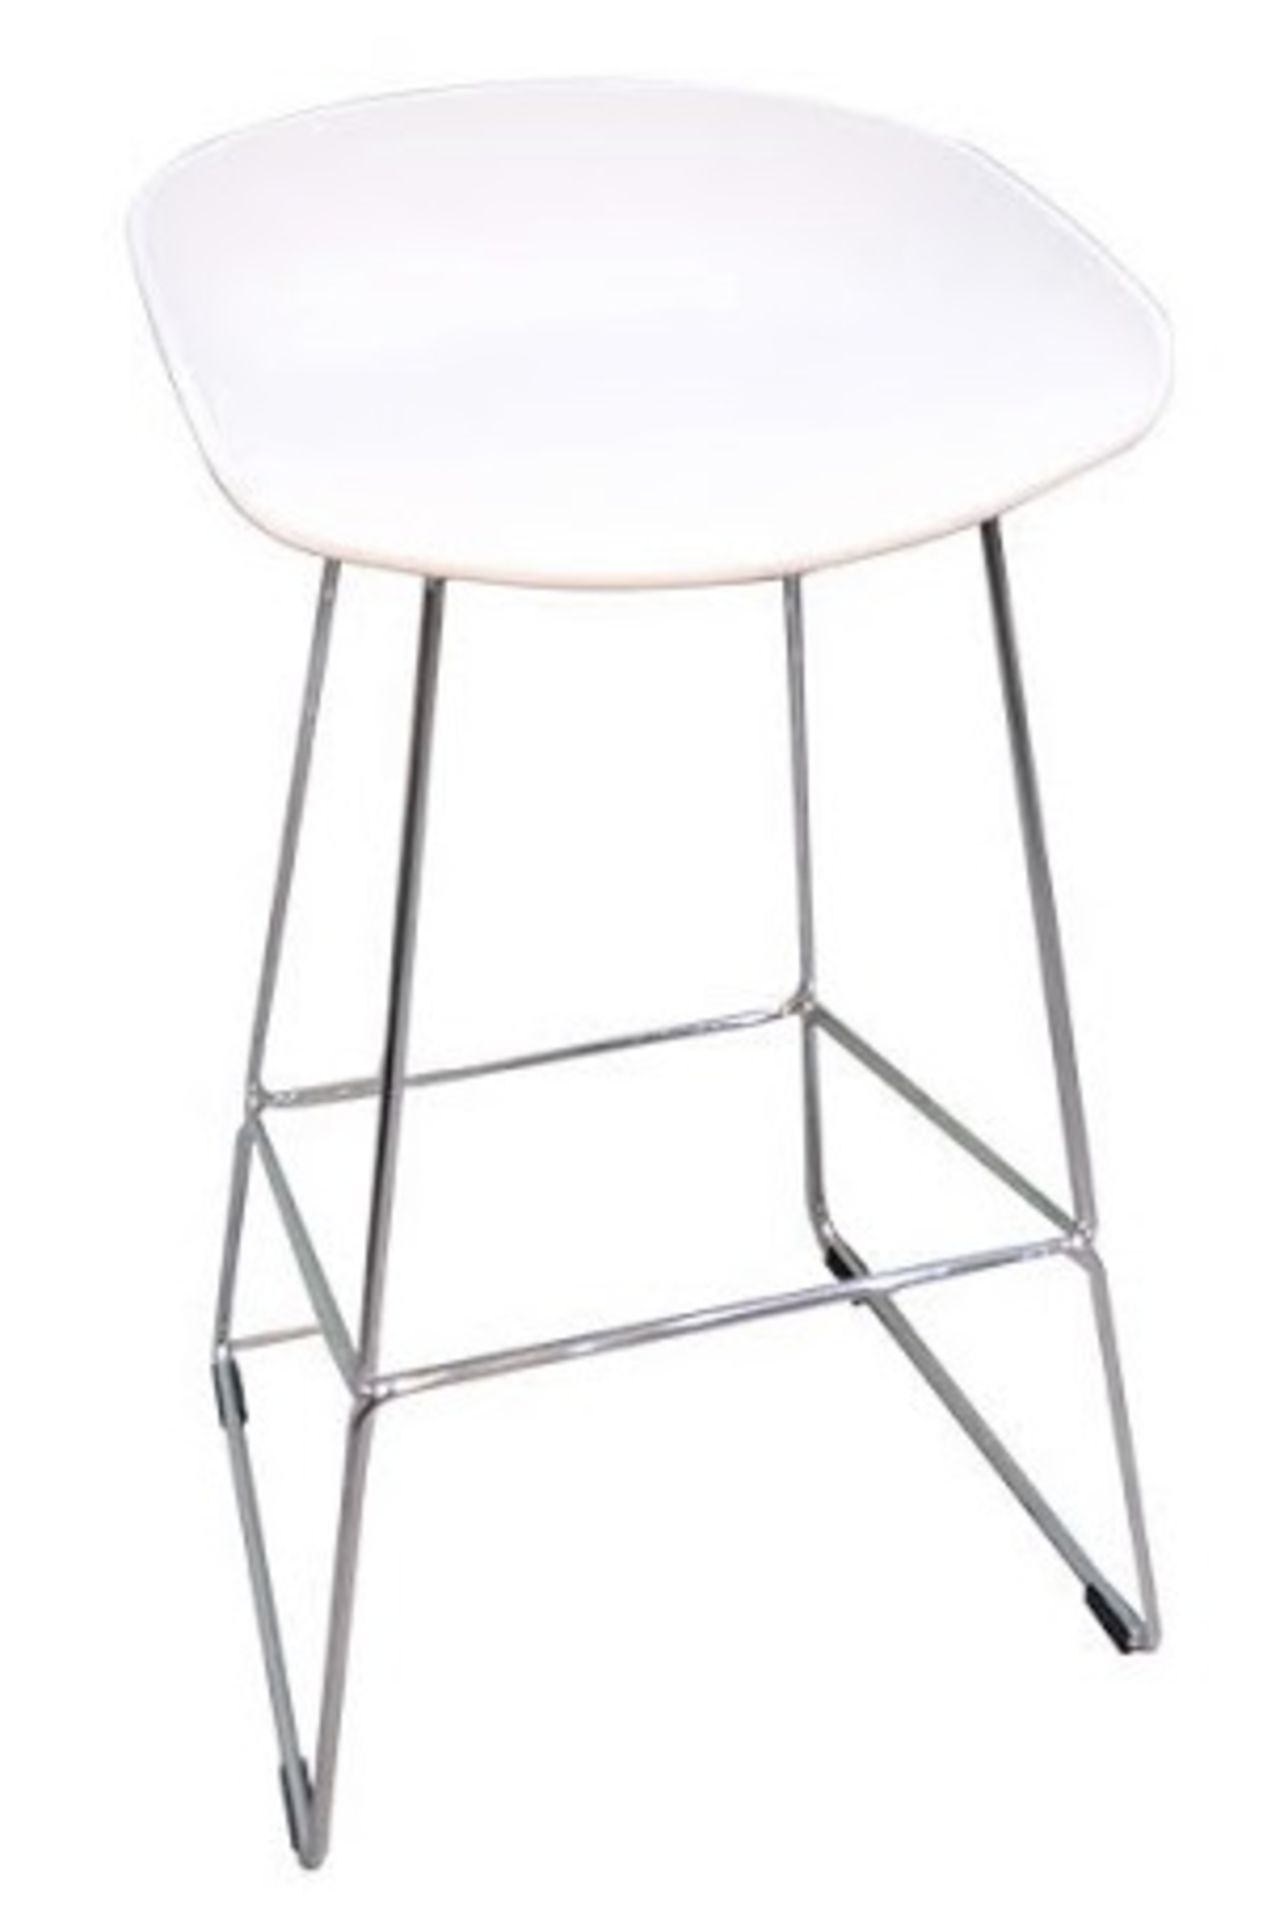 4 x OSLO Contemporary Bar Stools With White Moulded Seat And Metal Base - Brand New / Unboxed - - Image 4 of 5